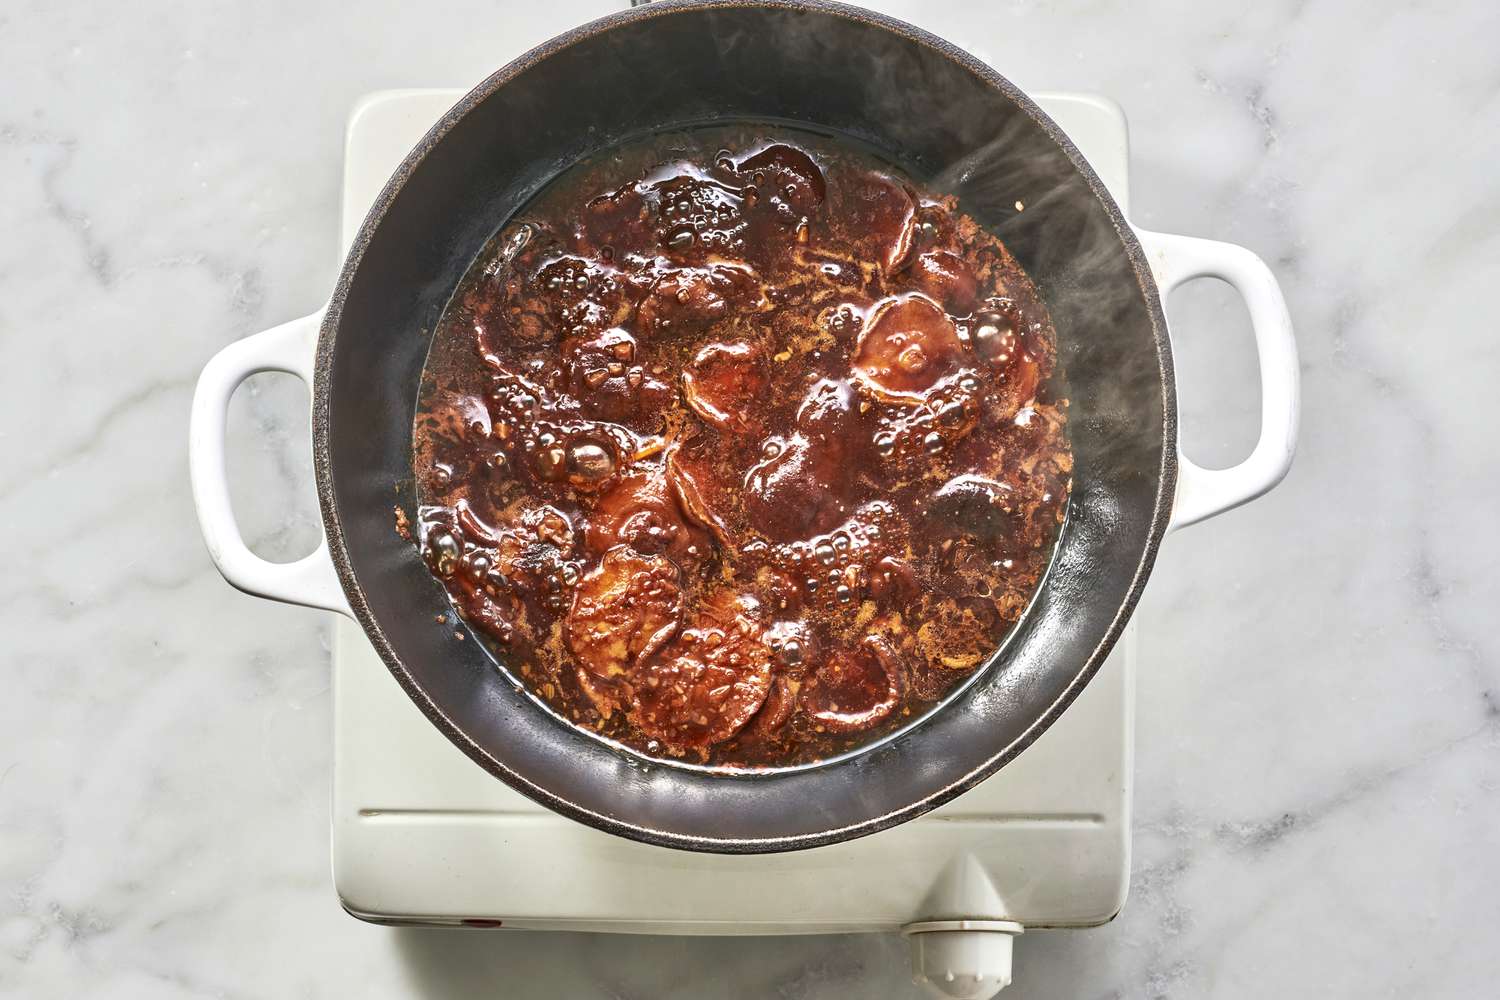 A pot of cooked shiitake mushrooms in a reduced braising sauce